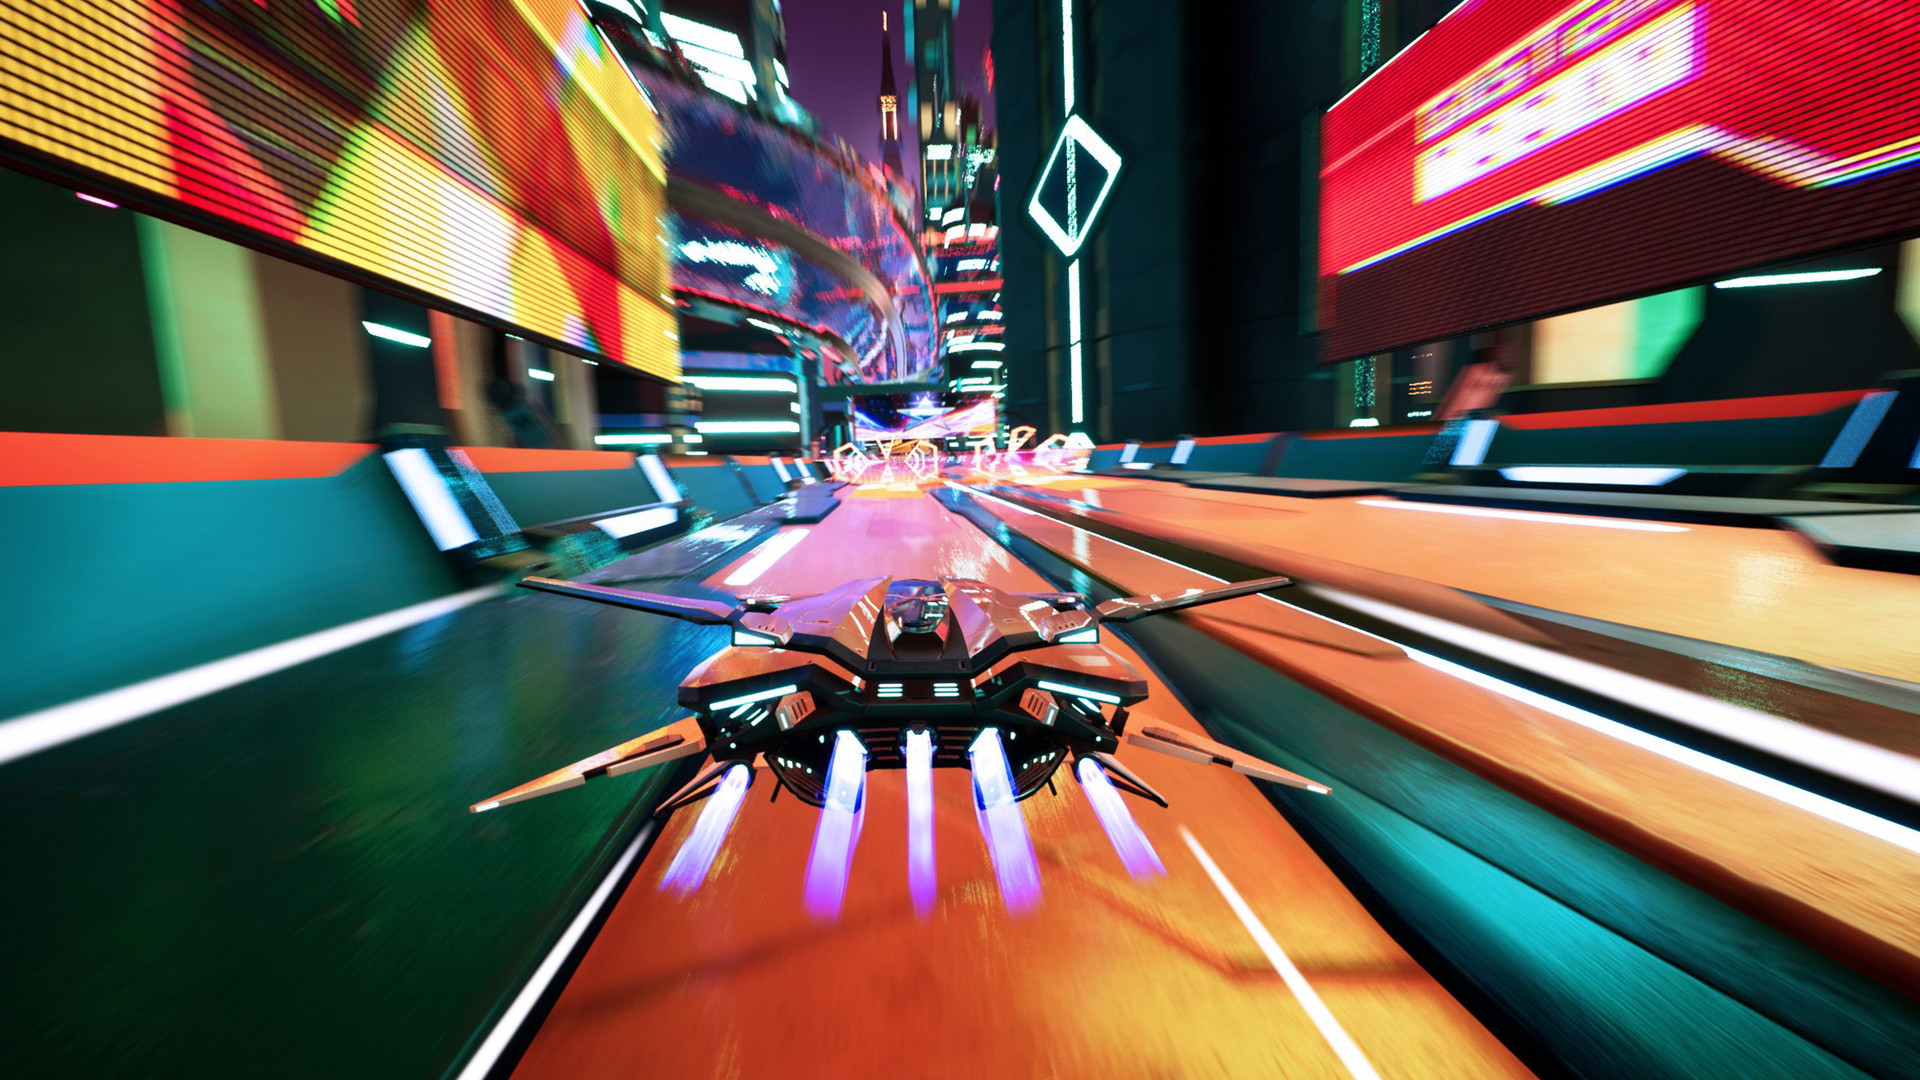 Redout 2 - Ultimate Edition